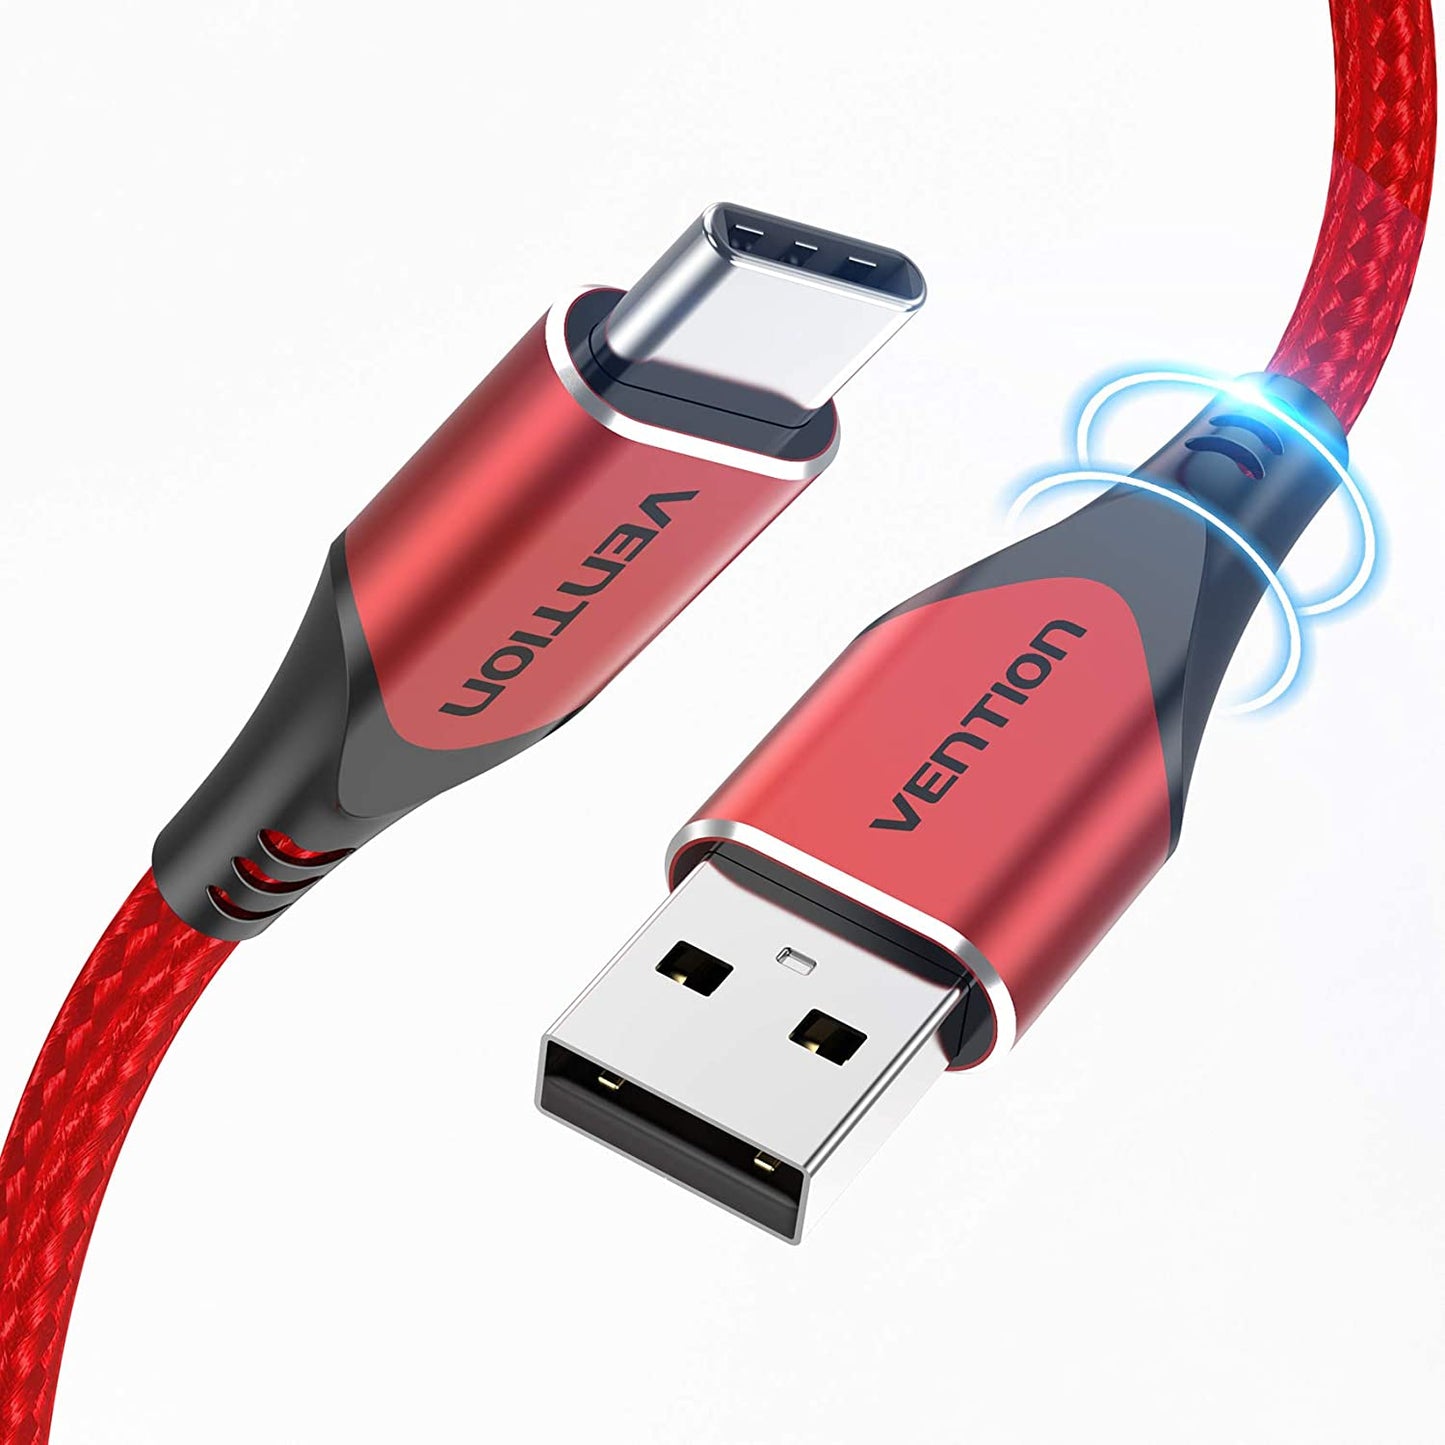 Vention Cotton Braided USB 2.0 A Male to C Male 3A USB Cable (CODR) 480Mbps for Smartphones, Tablets and Other USB -C Devices (Available in Different Lengths)